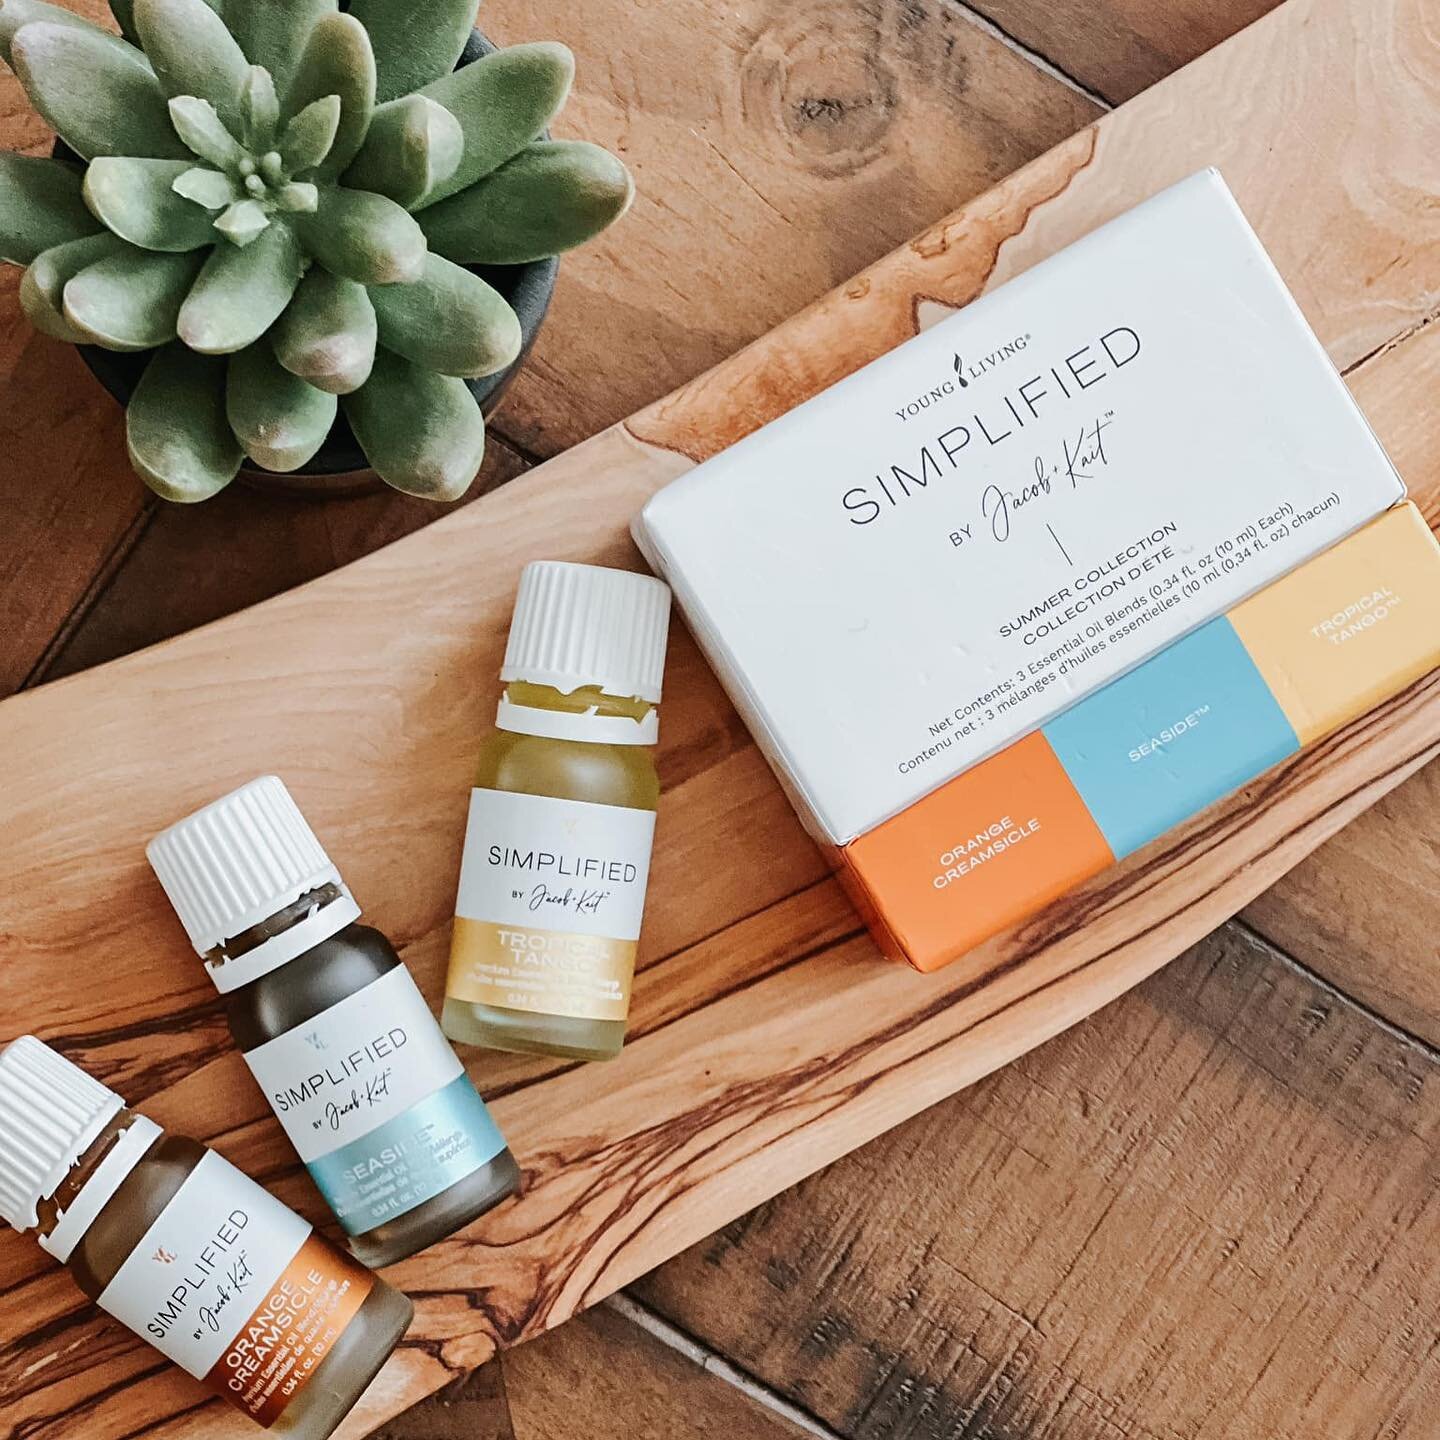 You&rsquo;re going to want to grab your Simplified summer collection ASAP - inventory is &lt;50% already!

This is the FUN + EASY button right here! Three seasonal blends that are done for you - No need to blend multiple oils to get your home smellin